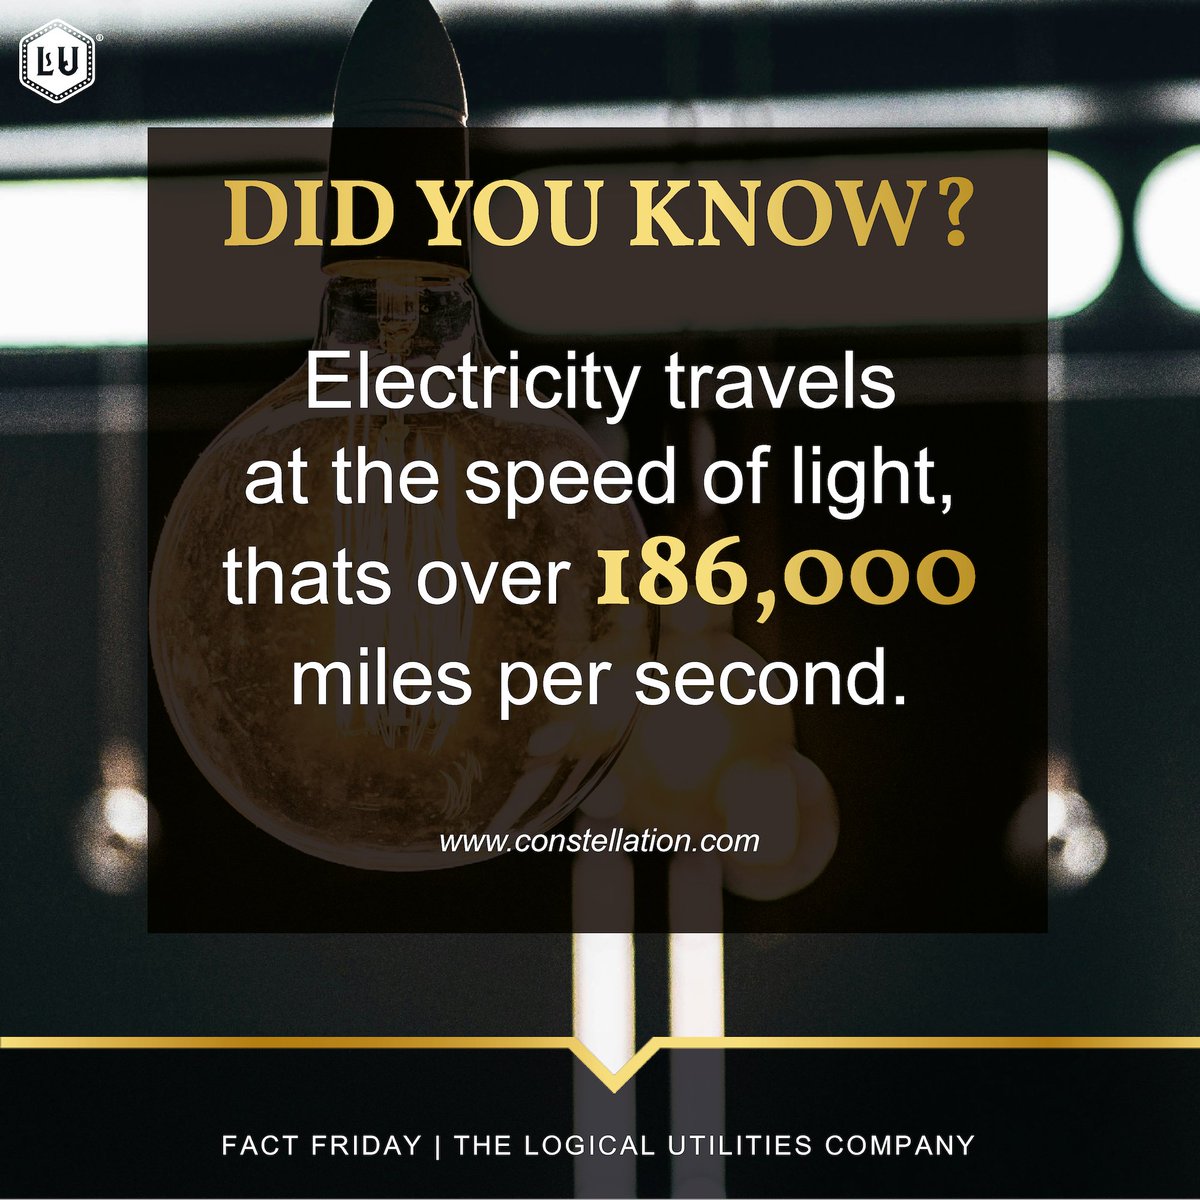 ⚡ Happy #FactFriday!

Follow Logical Utilities for more fun energy facts ✅

#logicalfunfact #logicalutilities #logical #thelogicalapproach